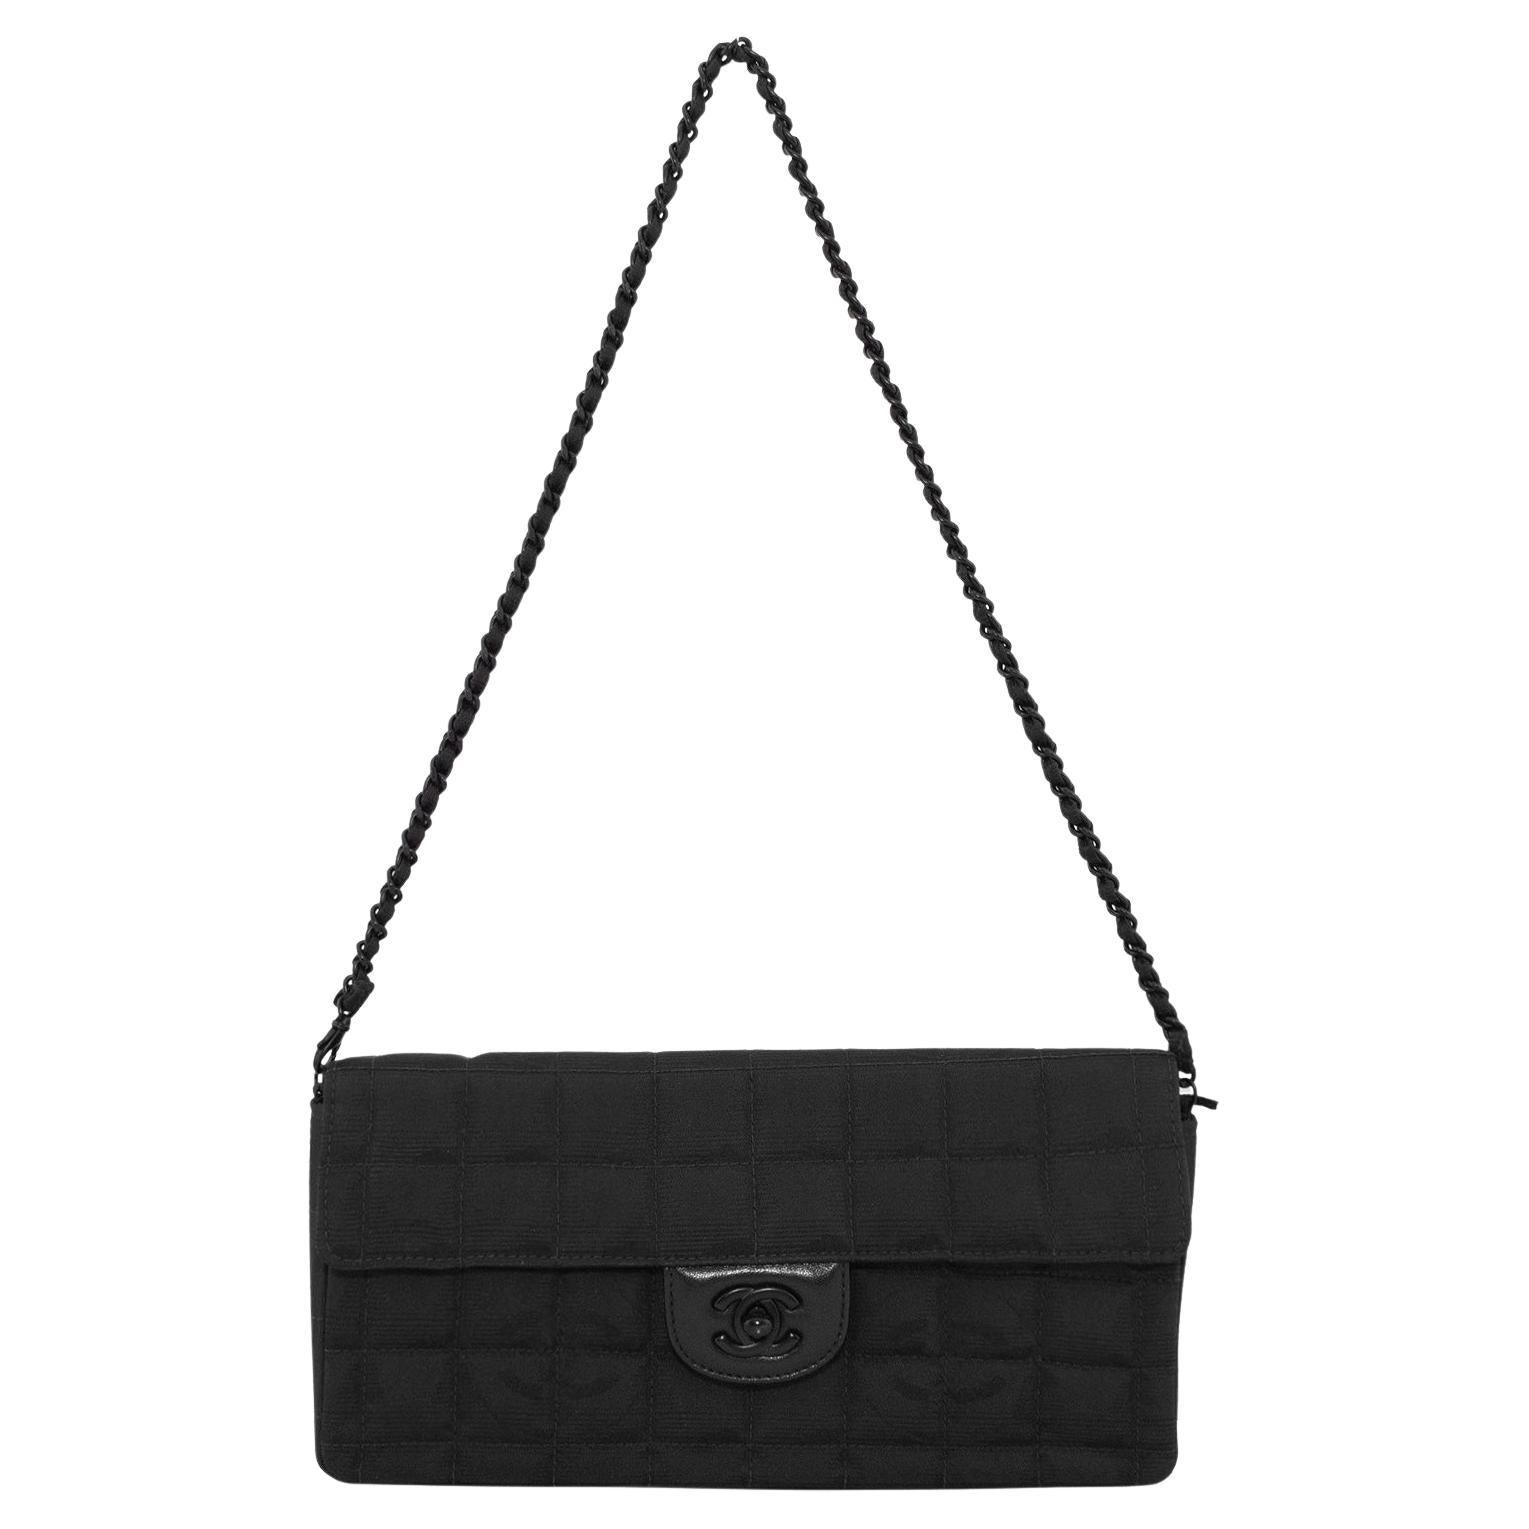 Super chic Chanel Travel East-West bag from the early 2000s. Black quilted nylon with the interlocking CC logo trademark print throughout the nylon. Black leather surrounding the twist lock with a matte black CC logo. Interior of flap is black